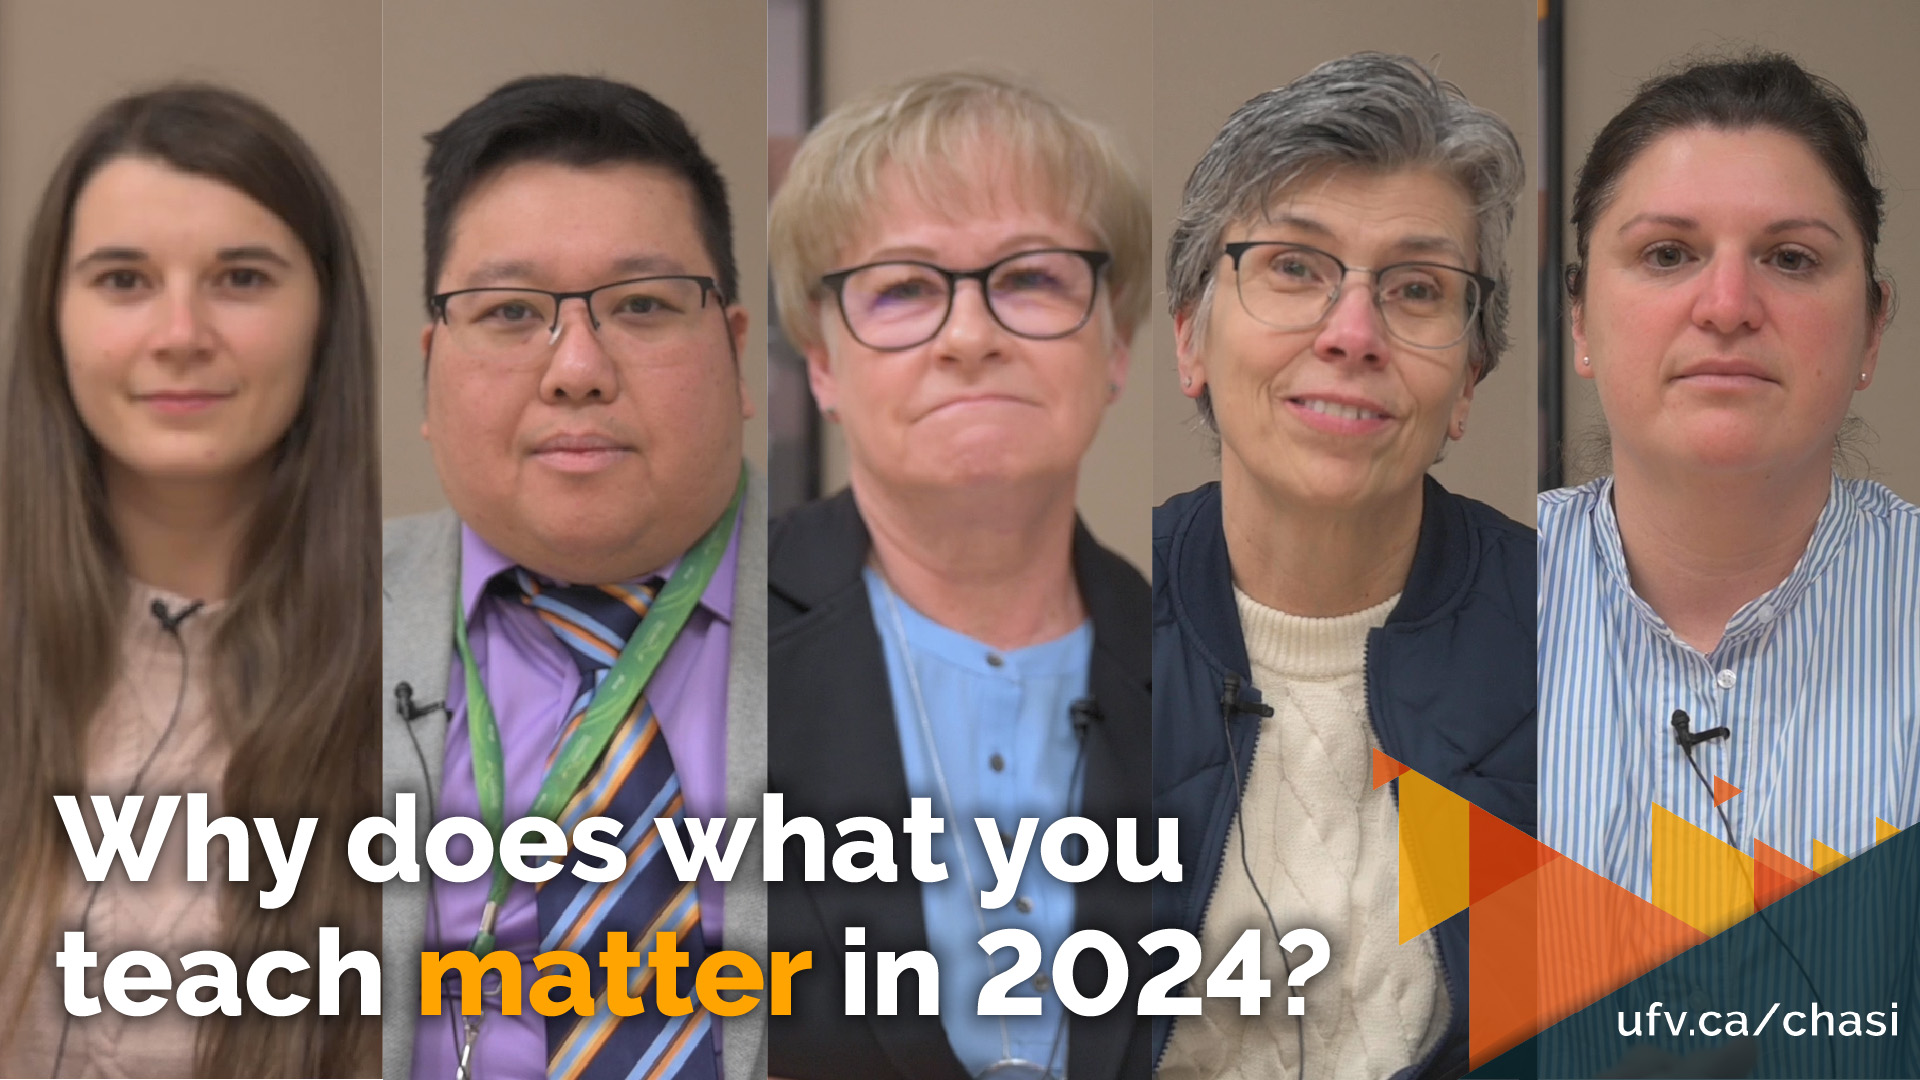 Video thumbnail showing the faces of six different people. Text reads: "why does what you teach matter in 2024?"